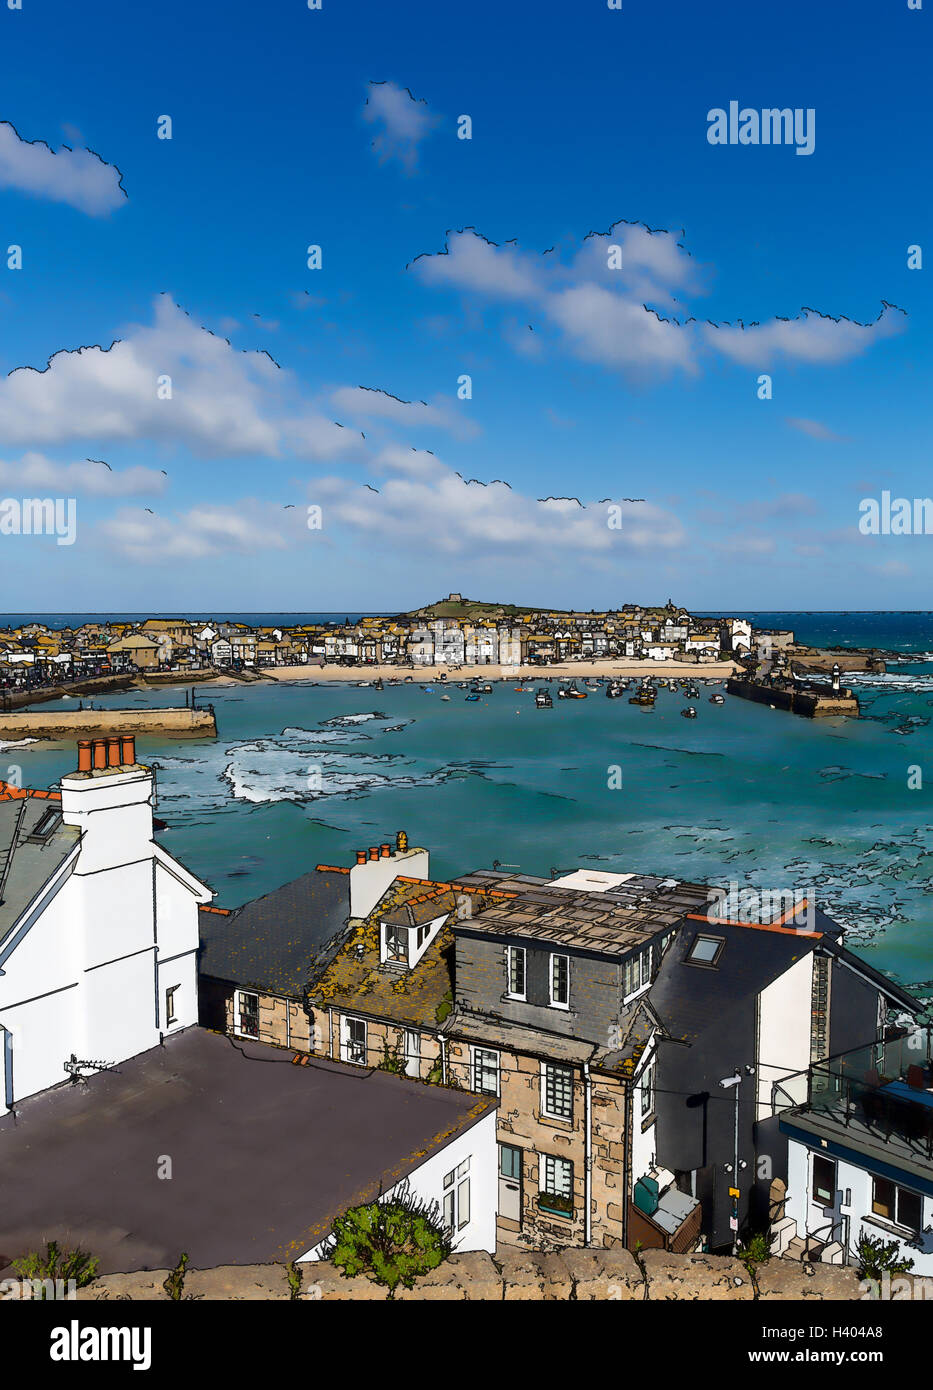 St Ives Cornwall England uk beautiful coast town and harbour illustration like cartoon effect Stock Photo